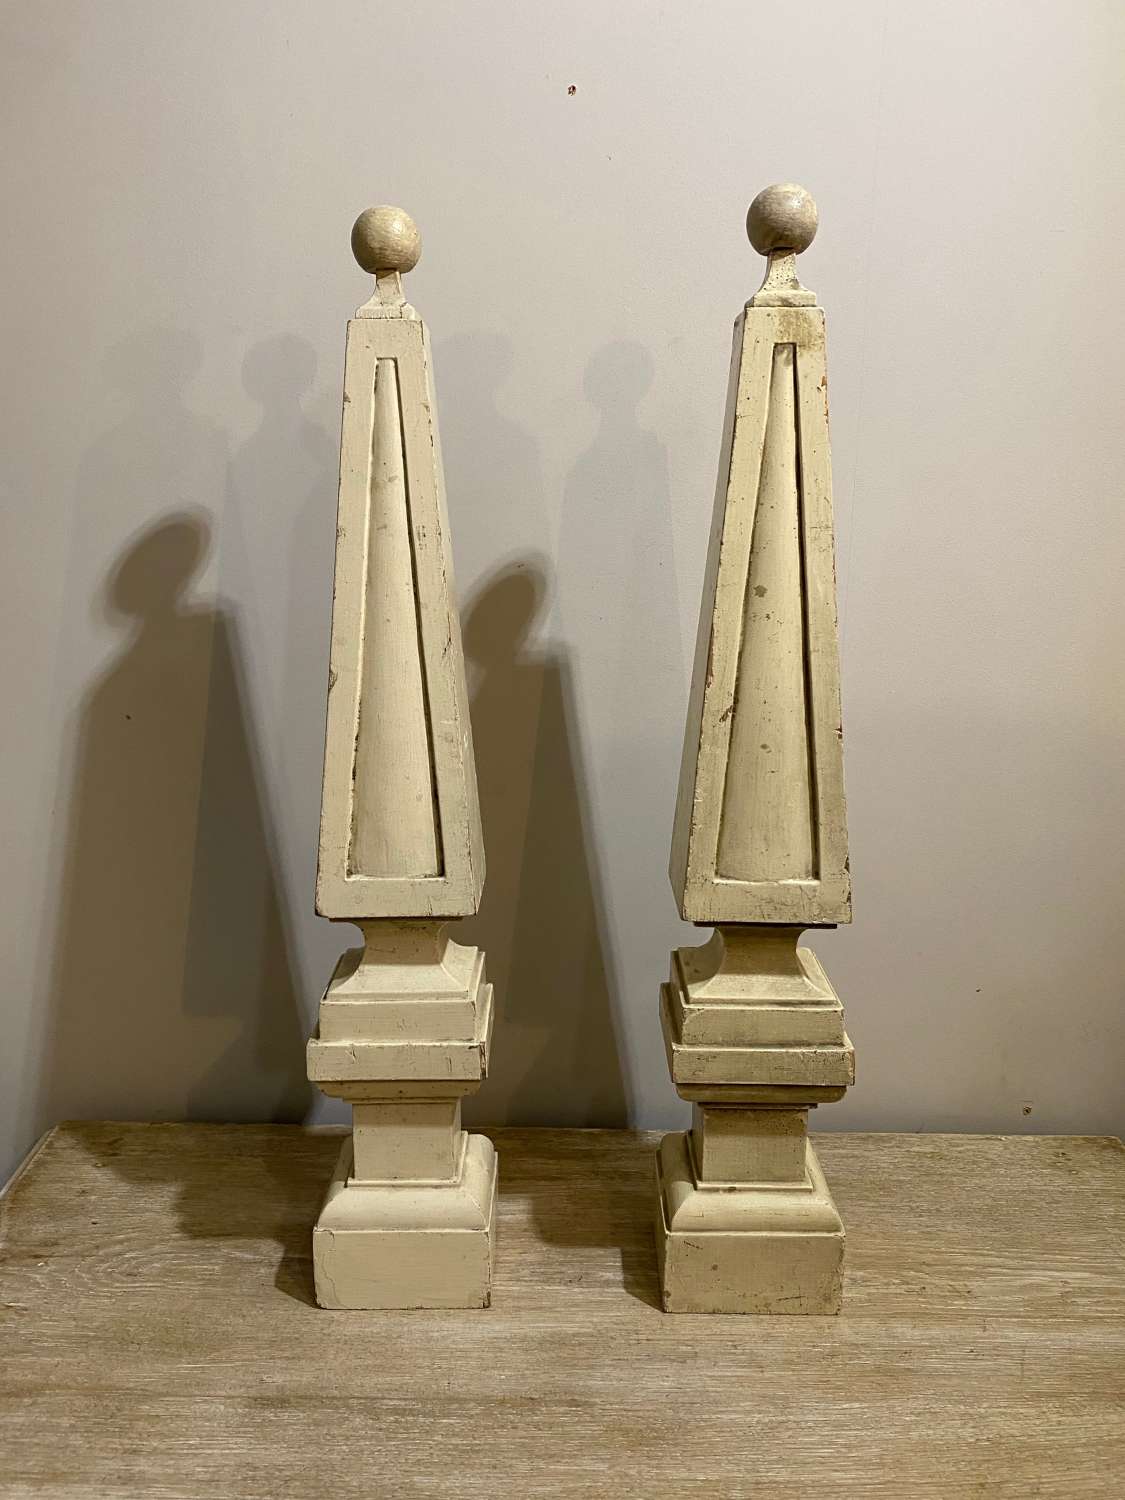 C1850 A Pair of Painted Wooden Obelisk